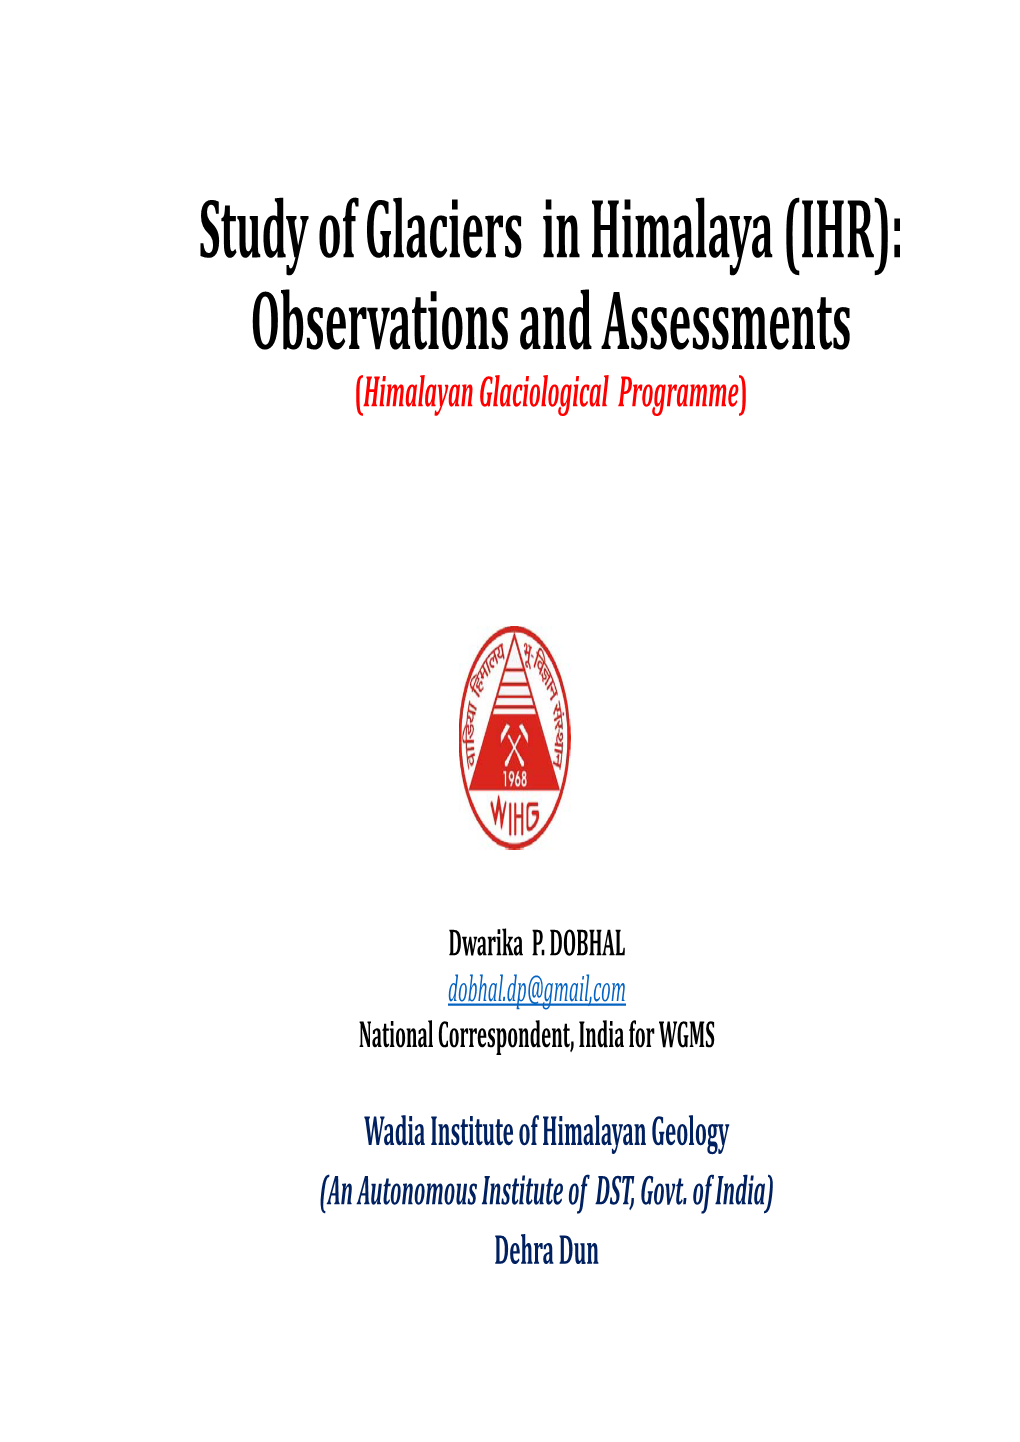 Study of Glaciers in Himalaya (IHR): Observations and Assessments (Himalayan Glaciological Programme)